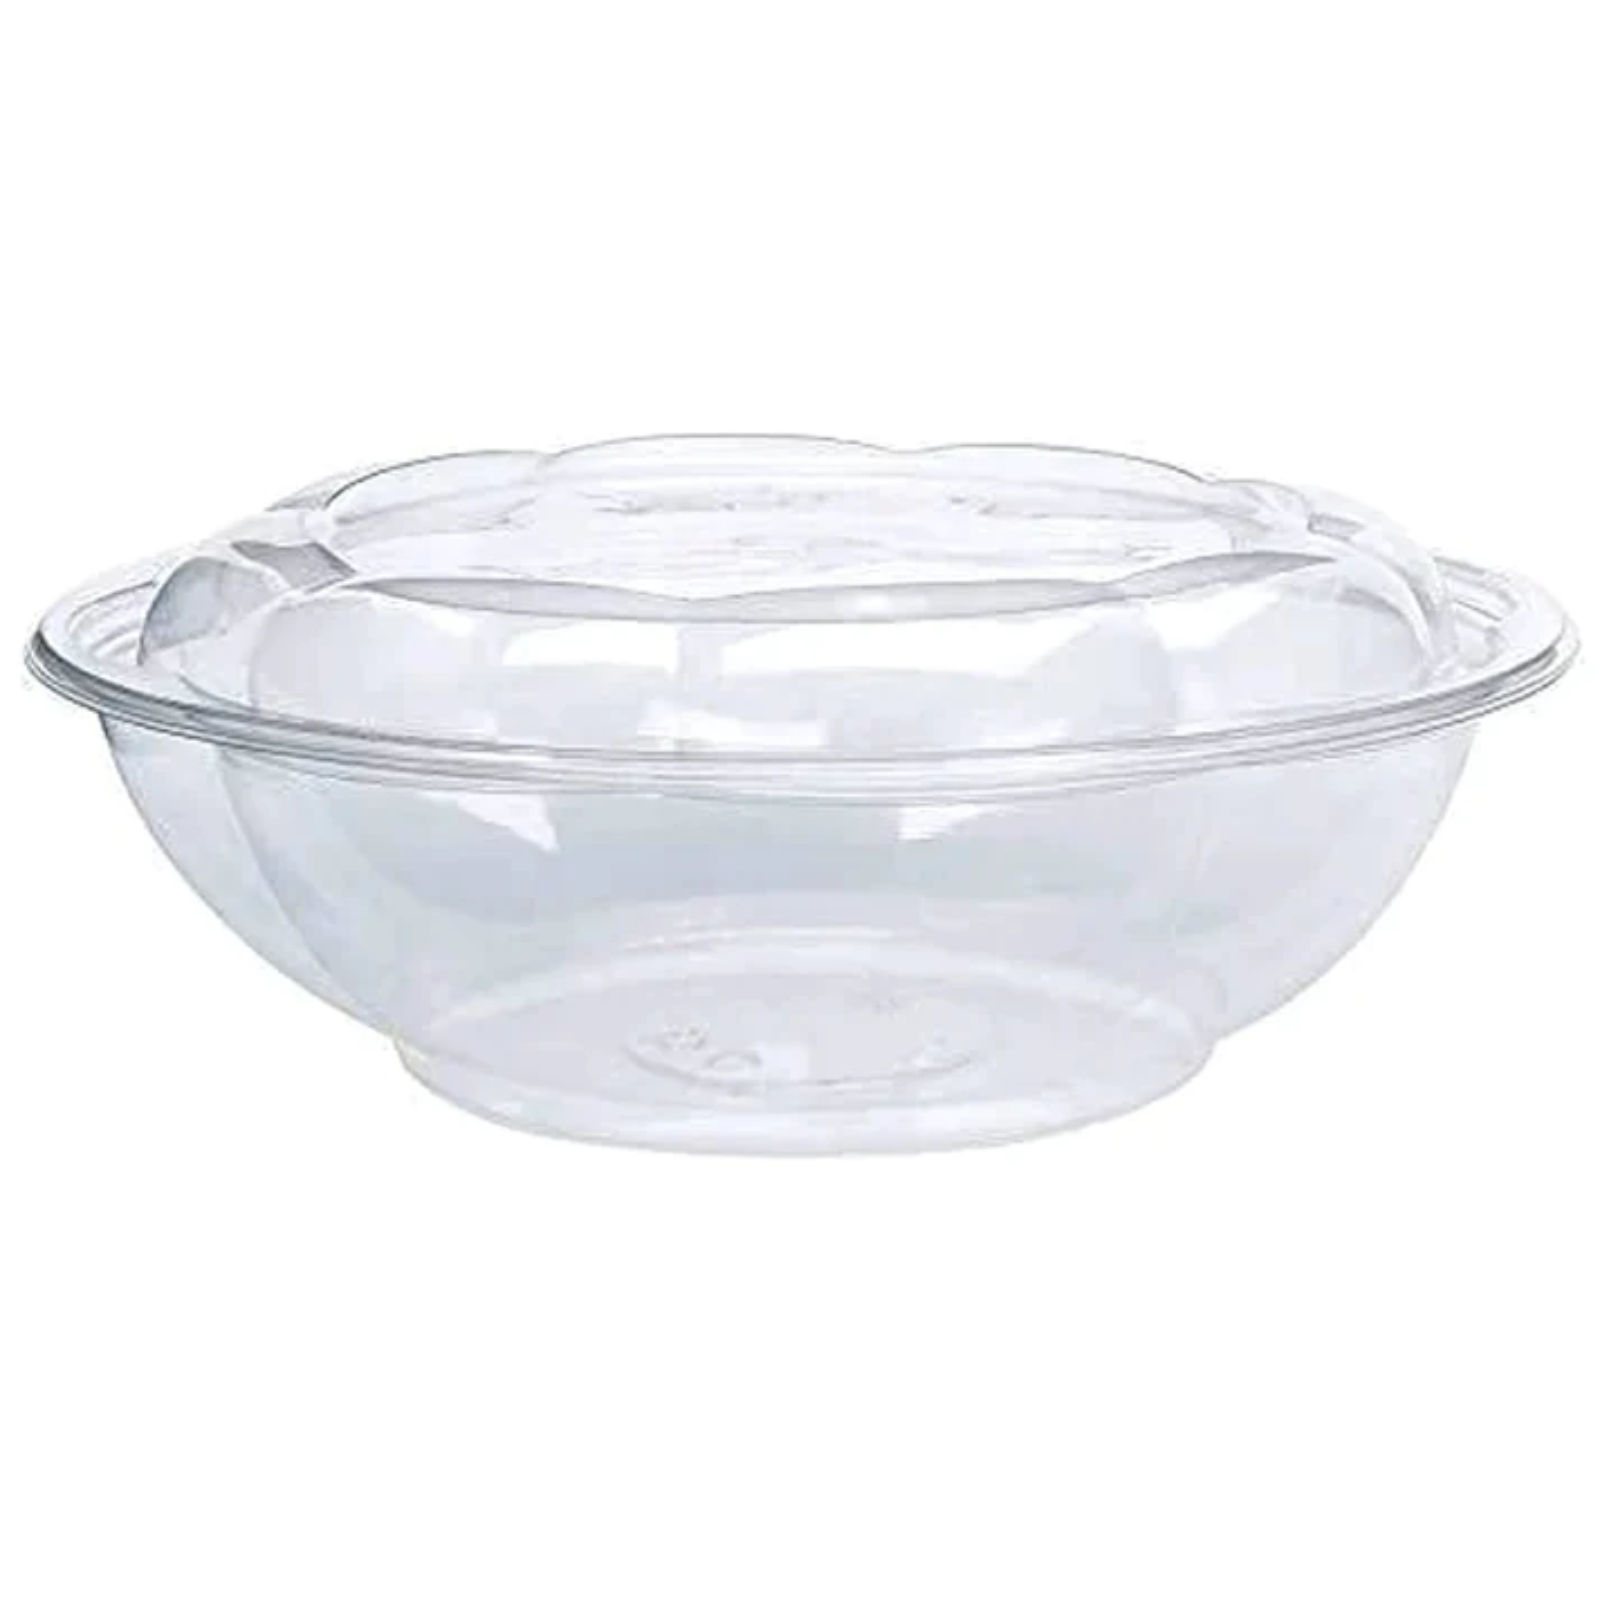 64oz Disposable Rose / Salad Bowls To-Go Containers with Airtight Lids Smoothie Cups VeZee   